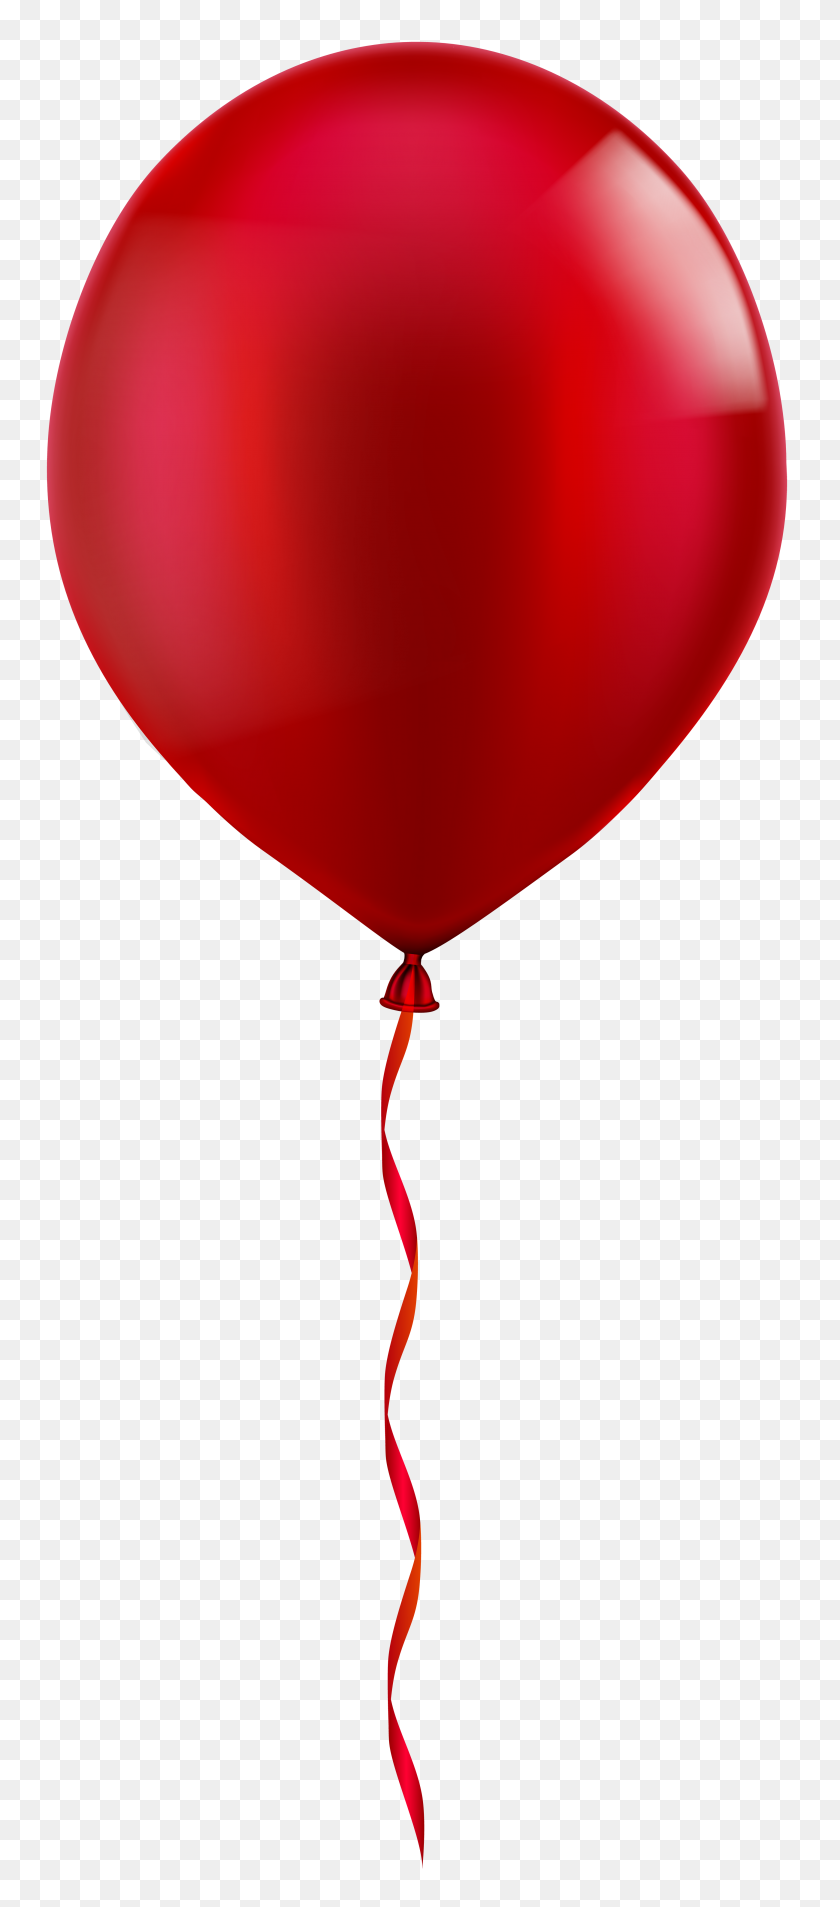 3378x8000 Red Balloons Clip Art, Red Balloons With Heart Transparent Png - Balloons And Confetti Clipart